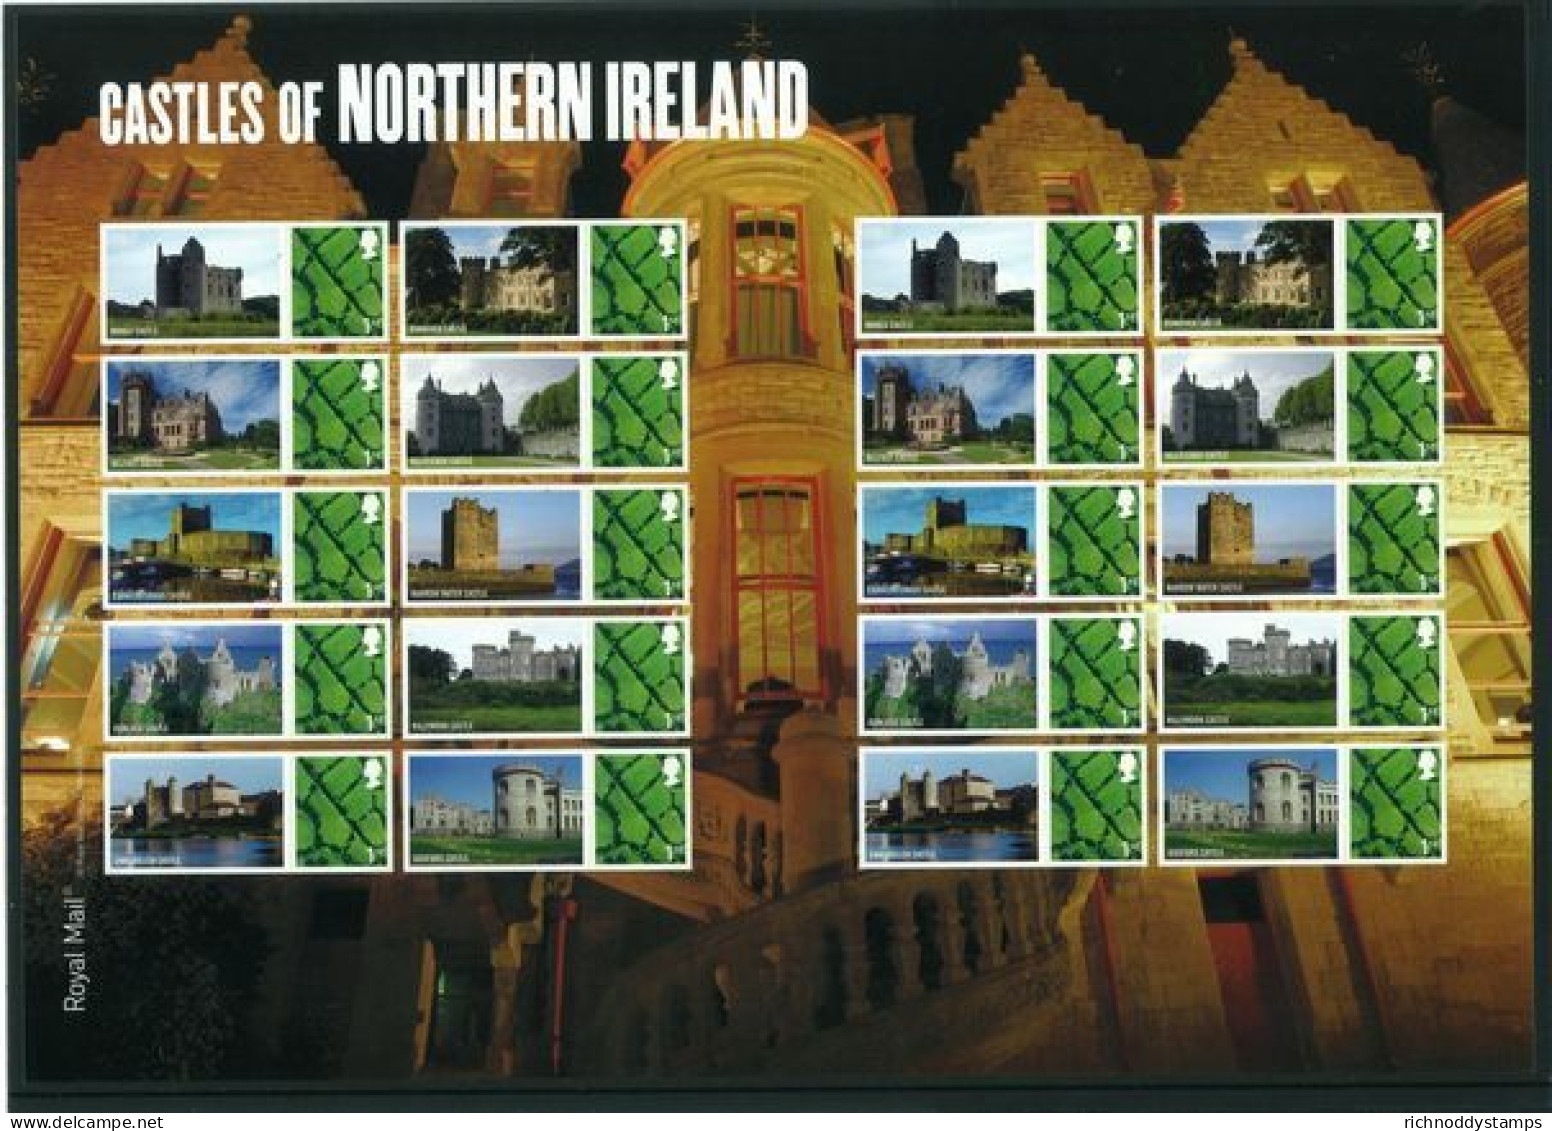 2009 Nothern Ireland Castles Patchwork Fields 1st Class Smilers Unmounted Mint.  - Smilers Sheets